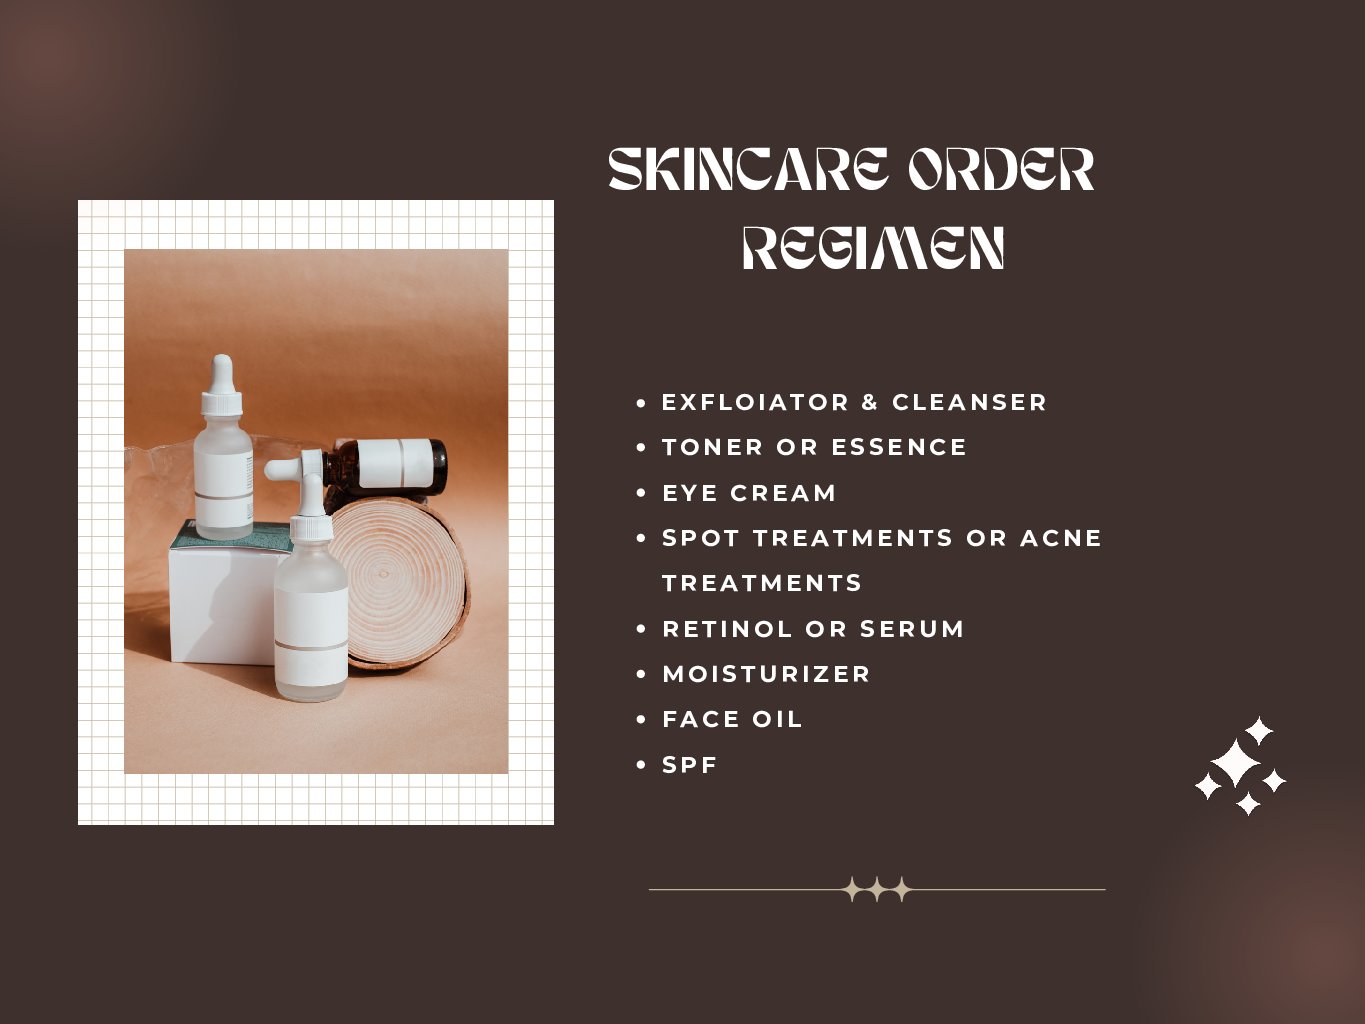 THE CORRECT ORDER IN APPLYING OUR SKIN CARE PRODUCTS